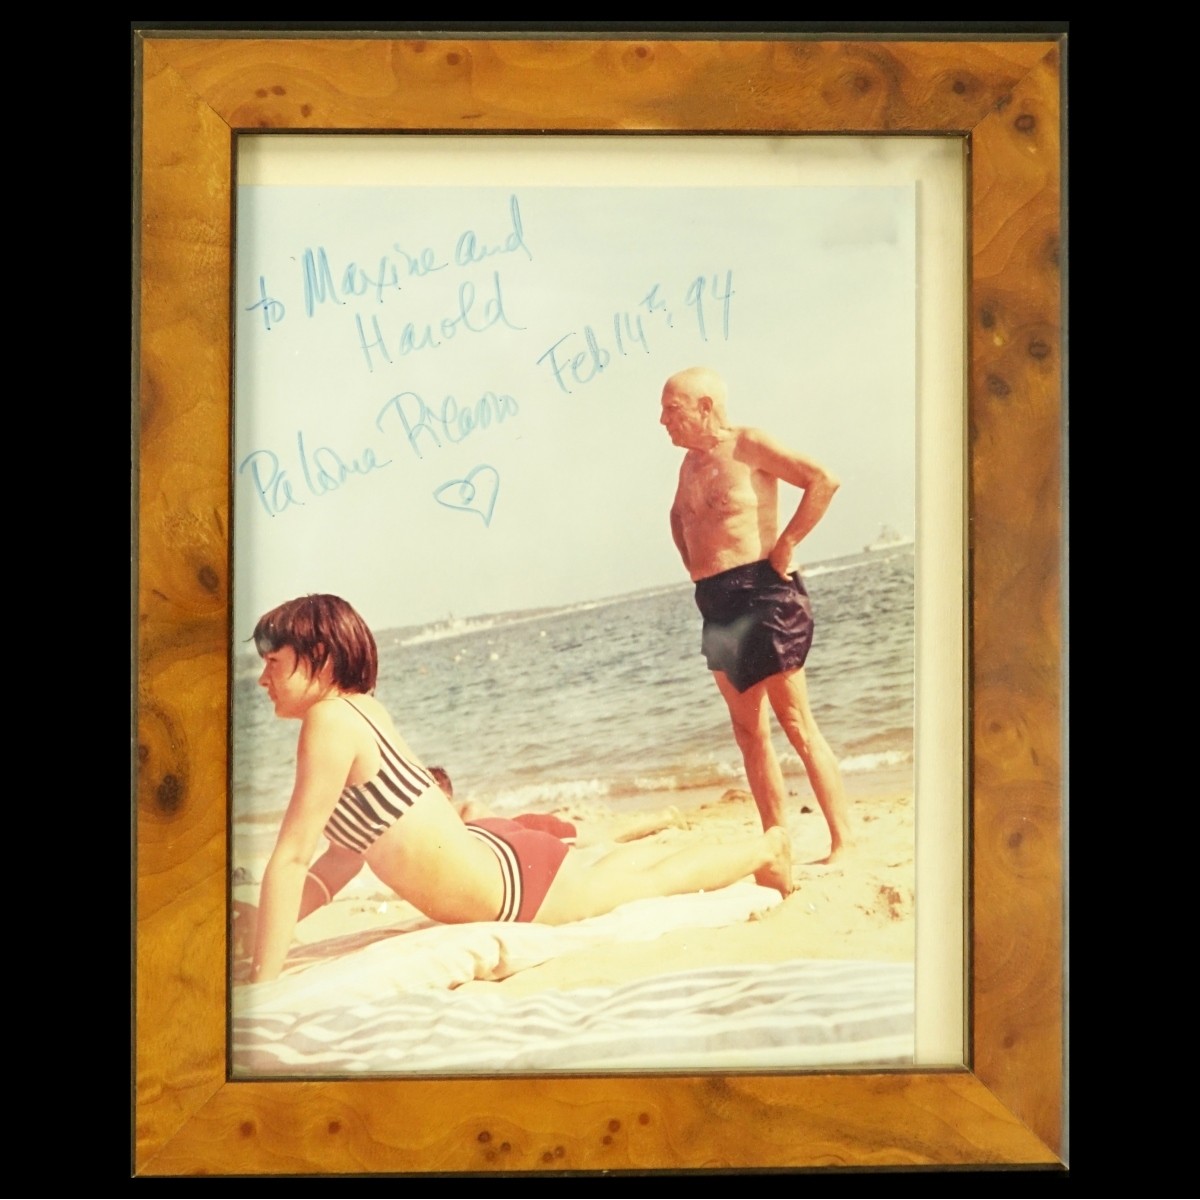 Photograph Of Picasso Signed By Paloma Picasso